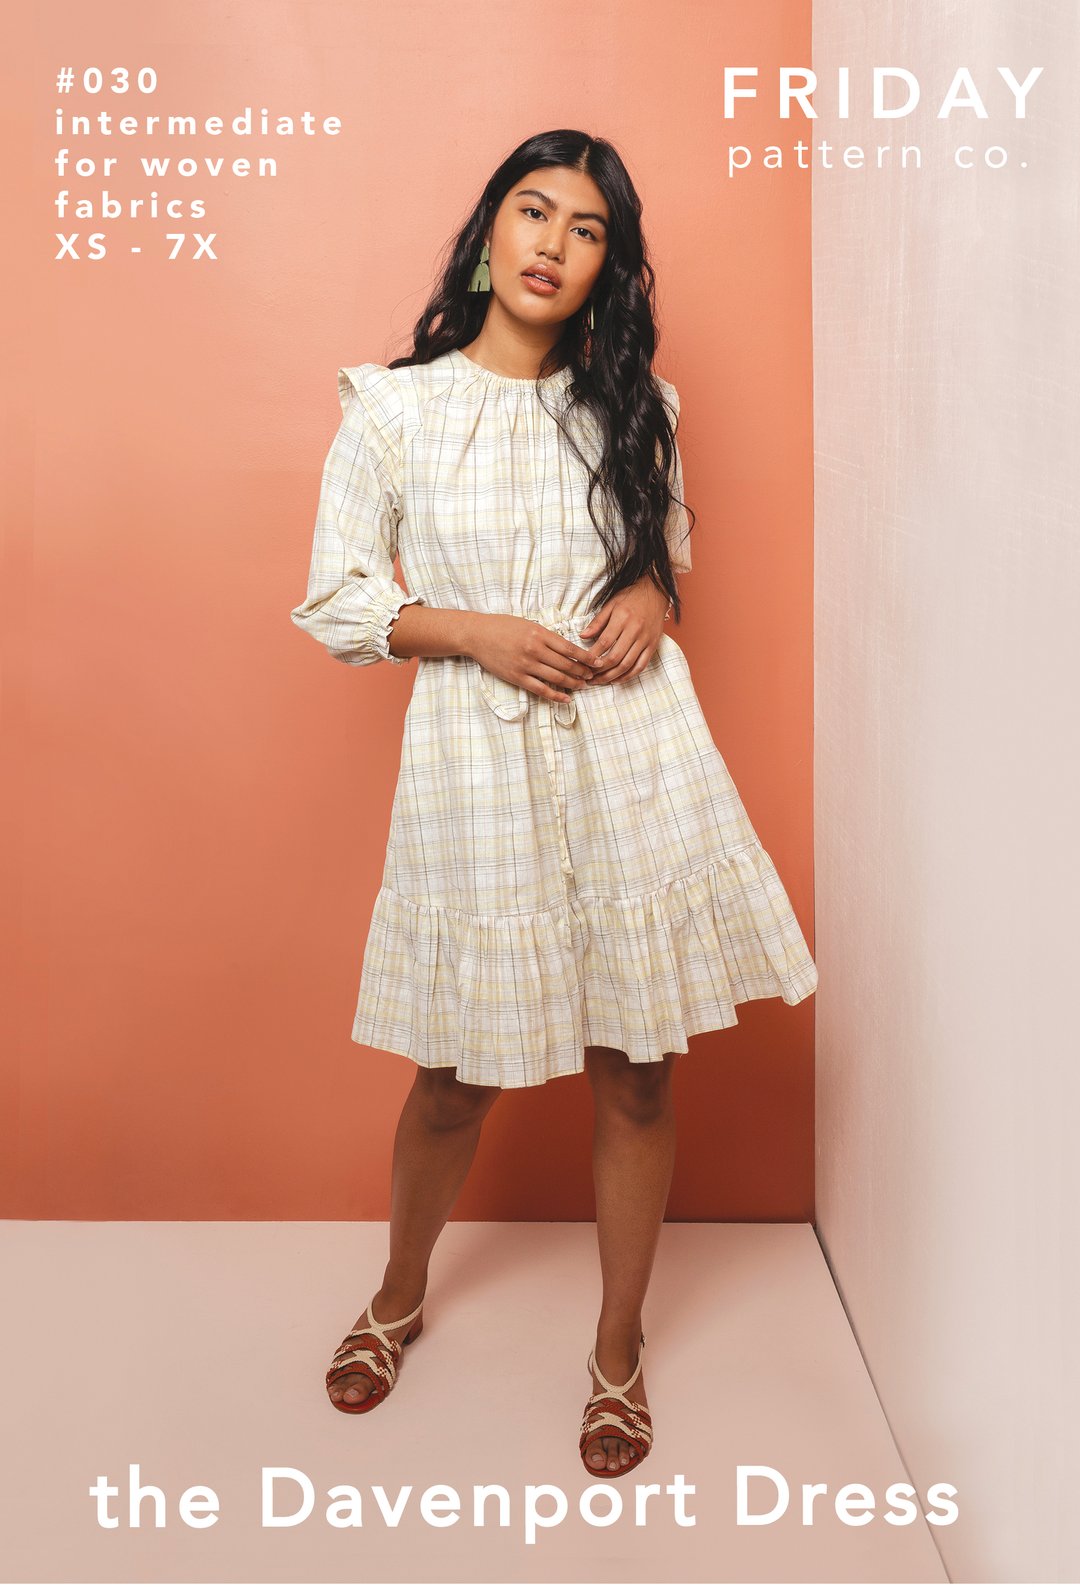 The Davenport Dress Sewing Pattern by Friday Pattern Co.